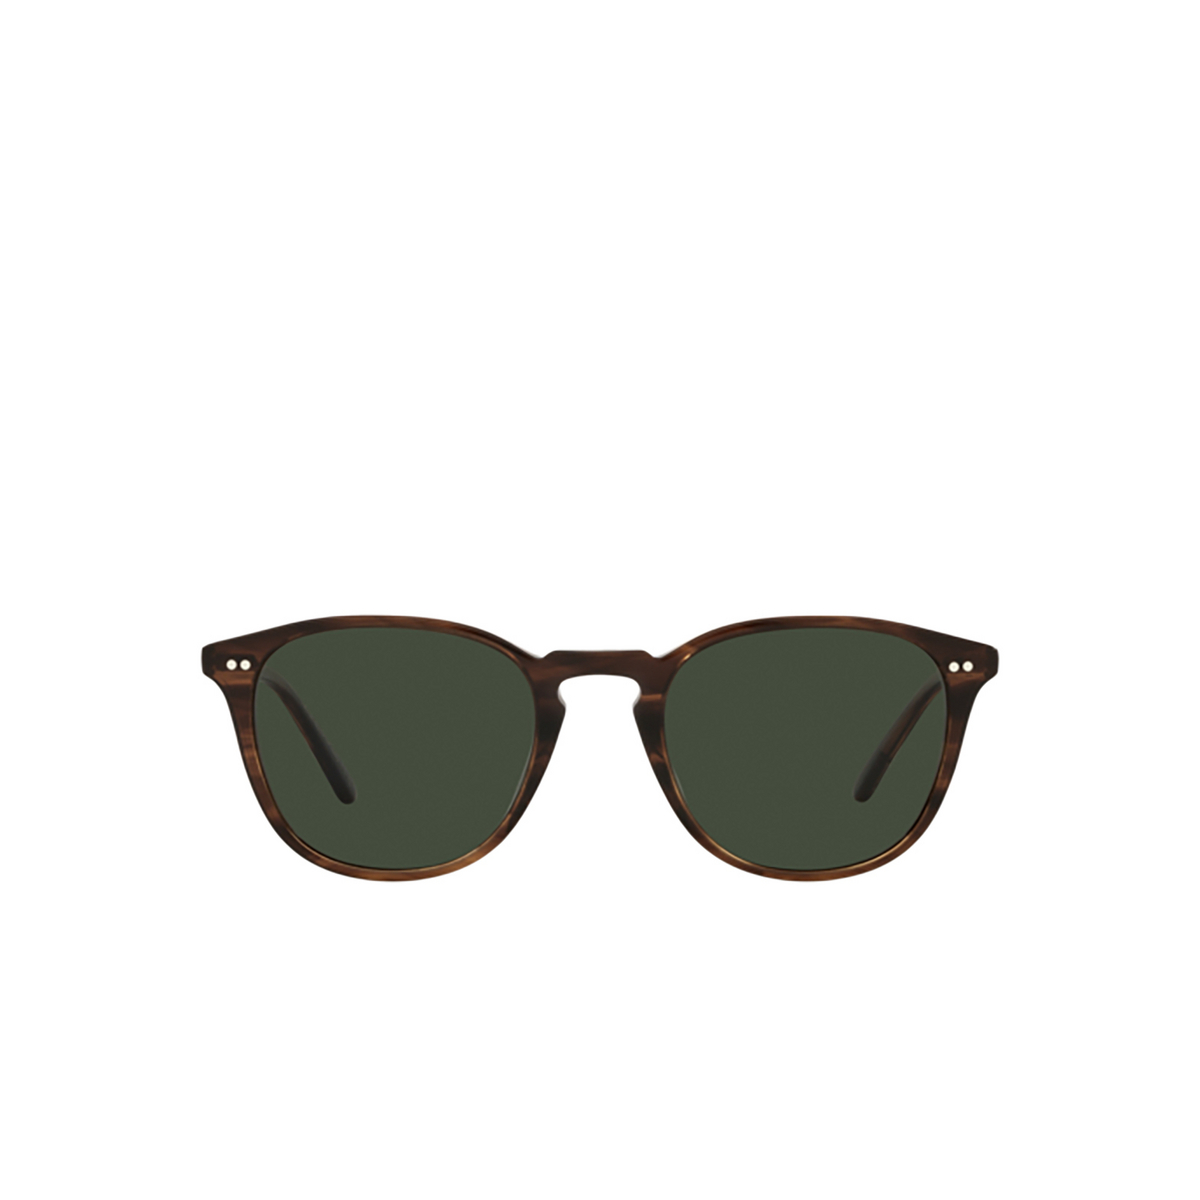 Oliver Peoples FORMAN L.A Sunglasses 17249A Tuscany Tortoise - front view